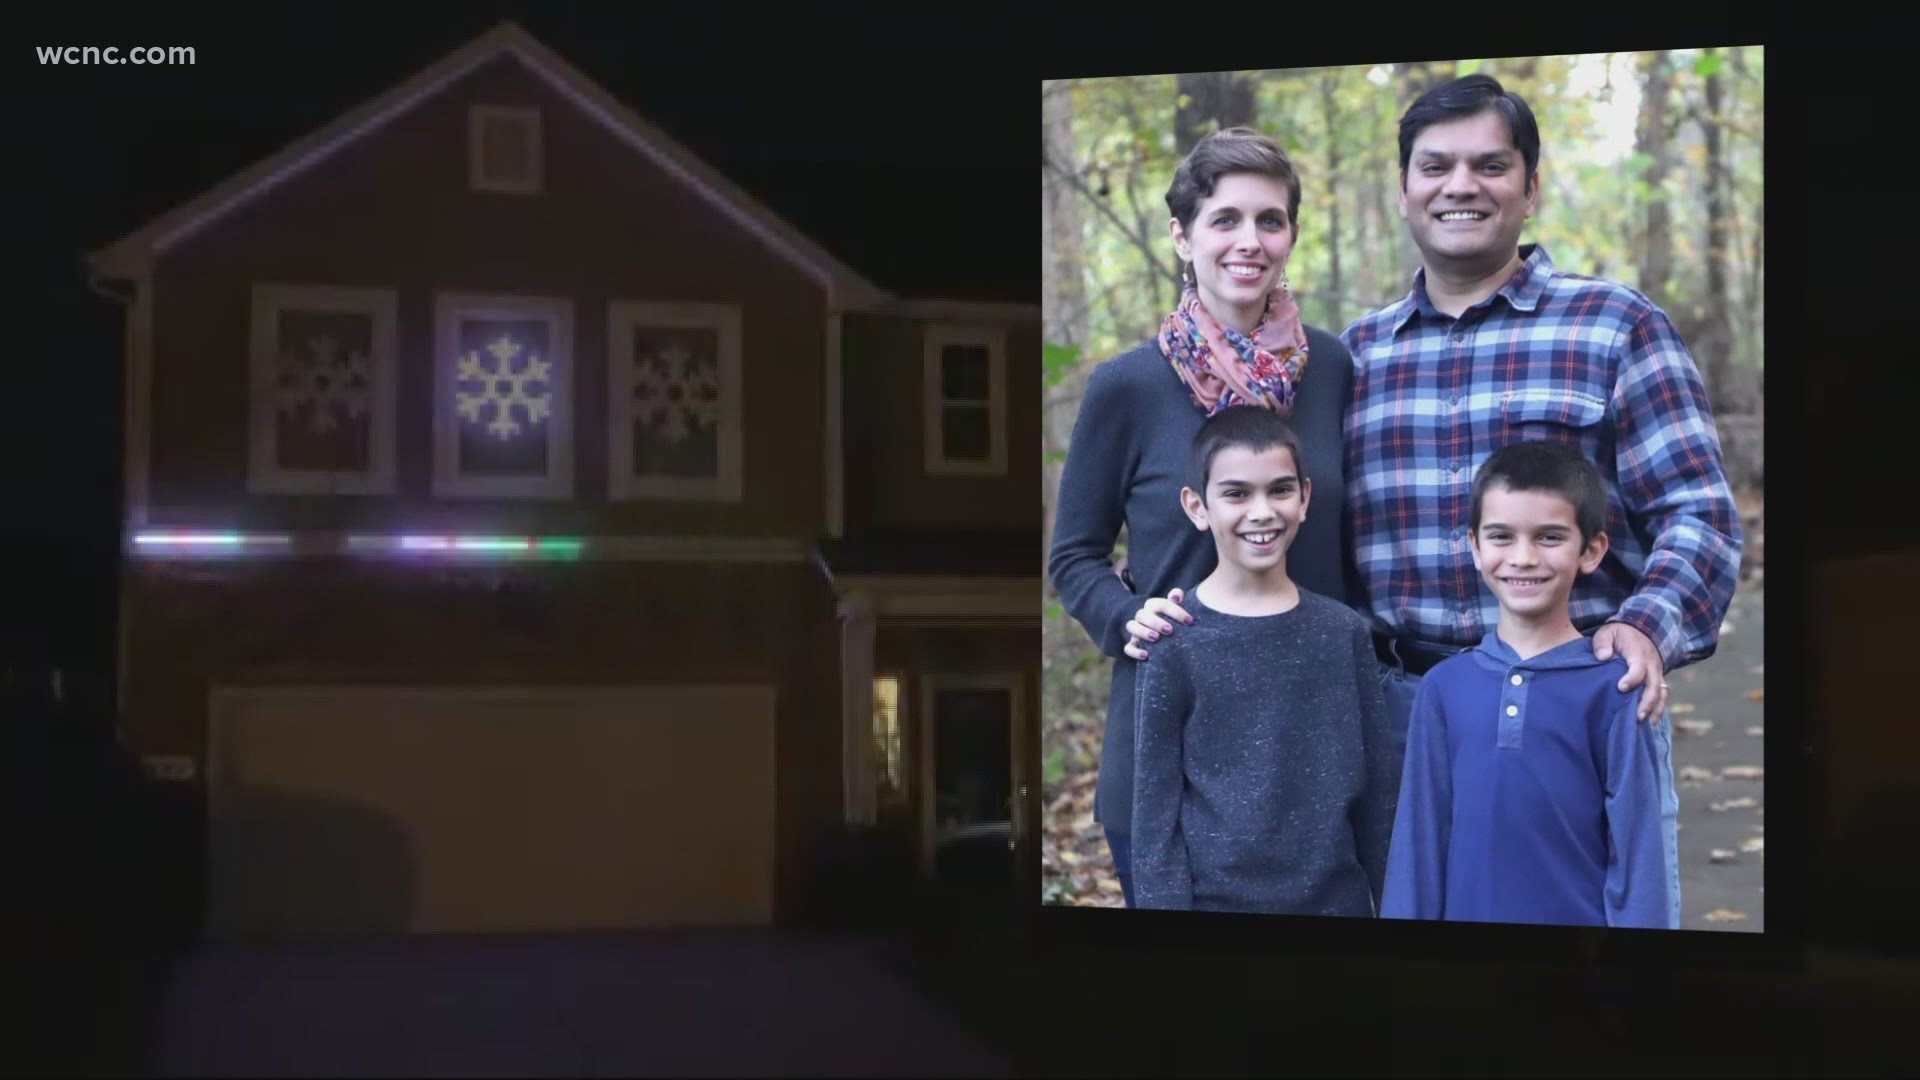 Daniel and Rosanna Christian have wowed with their musical holiday lights. This year their lights will bloom to life in pink.